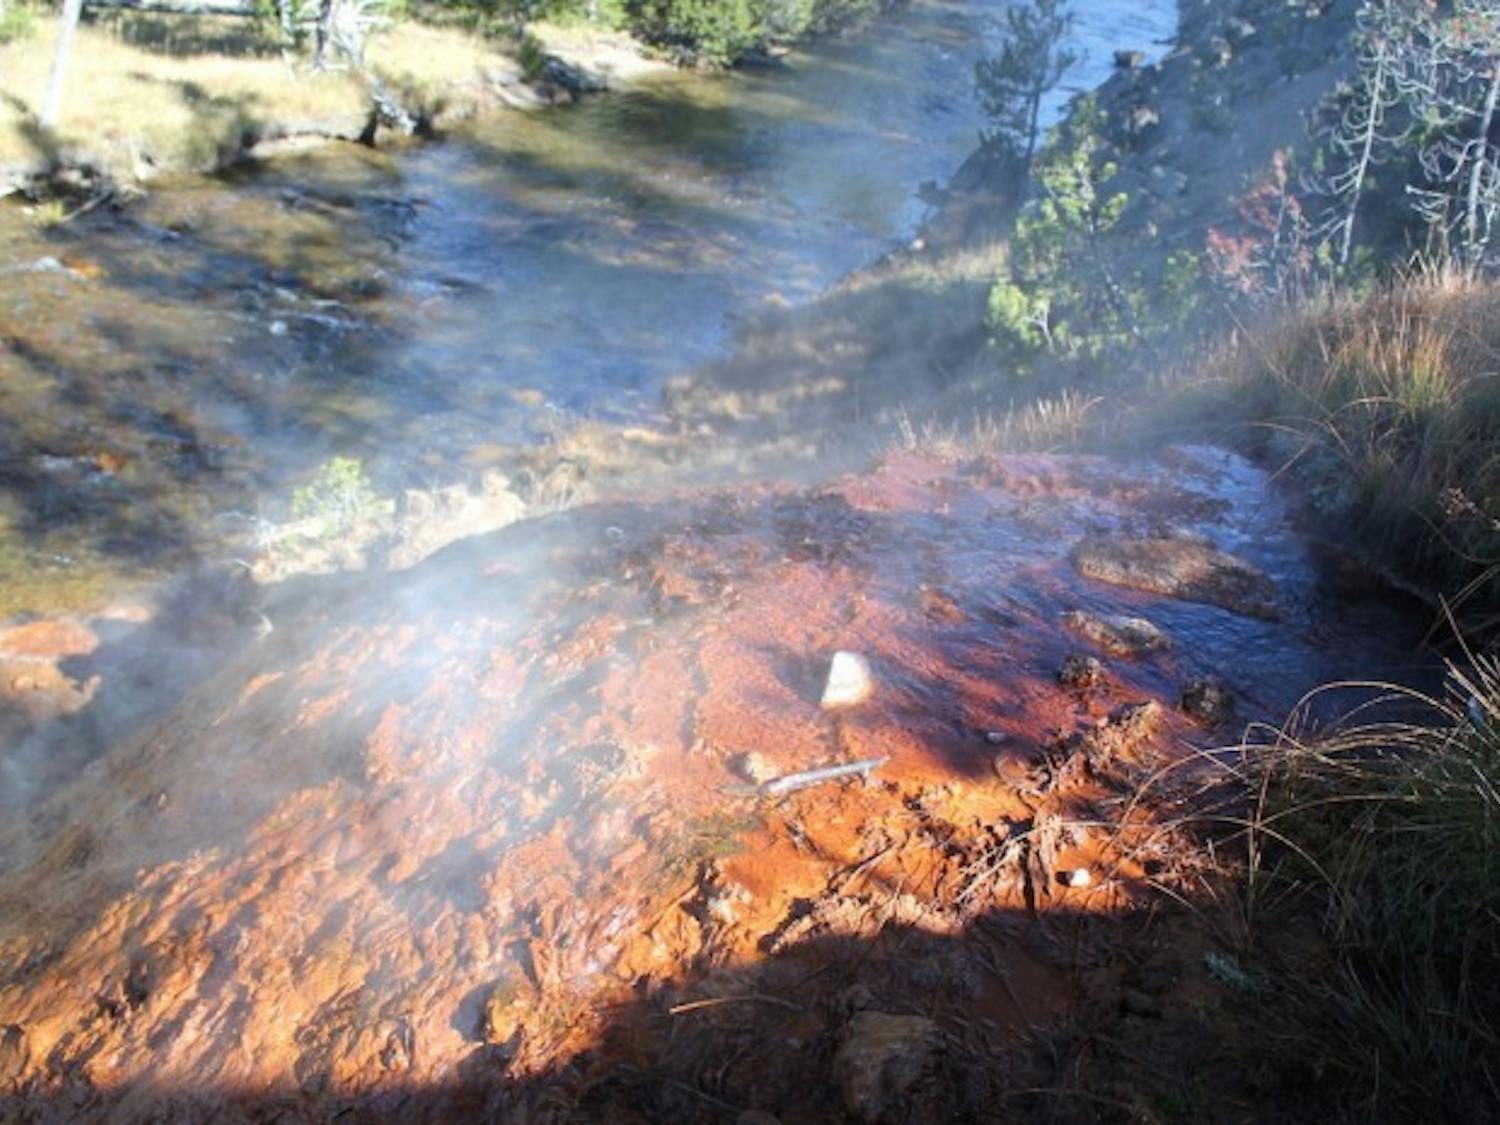 Geoscience researchers at UW-Madison made a major breakthrough in their study of bacteria at Yellowstone National Park.